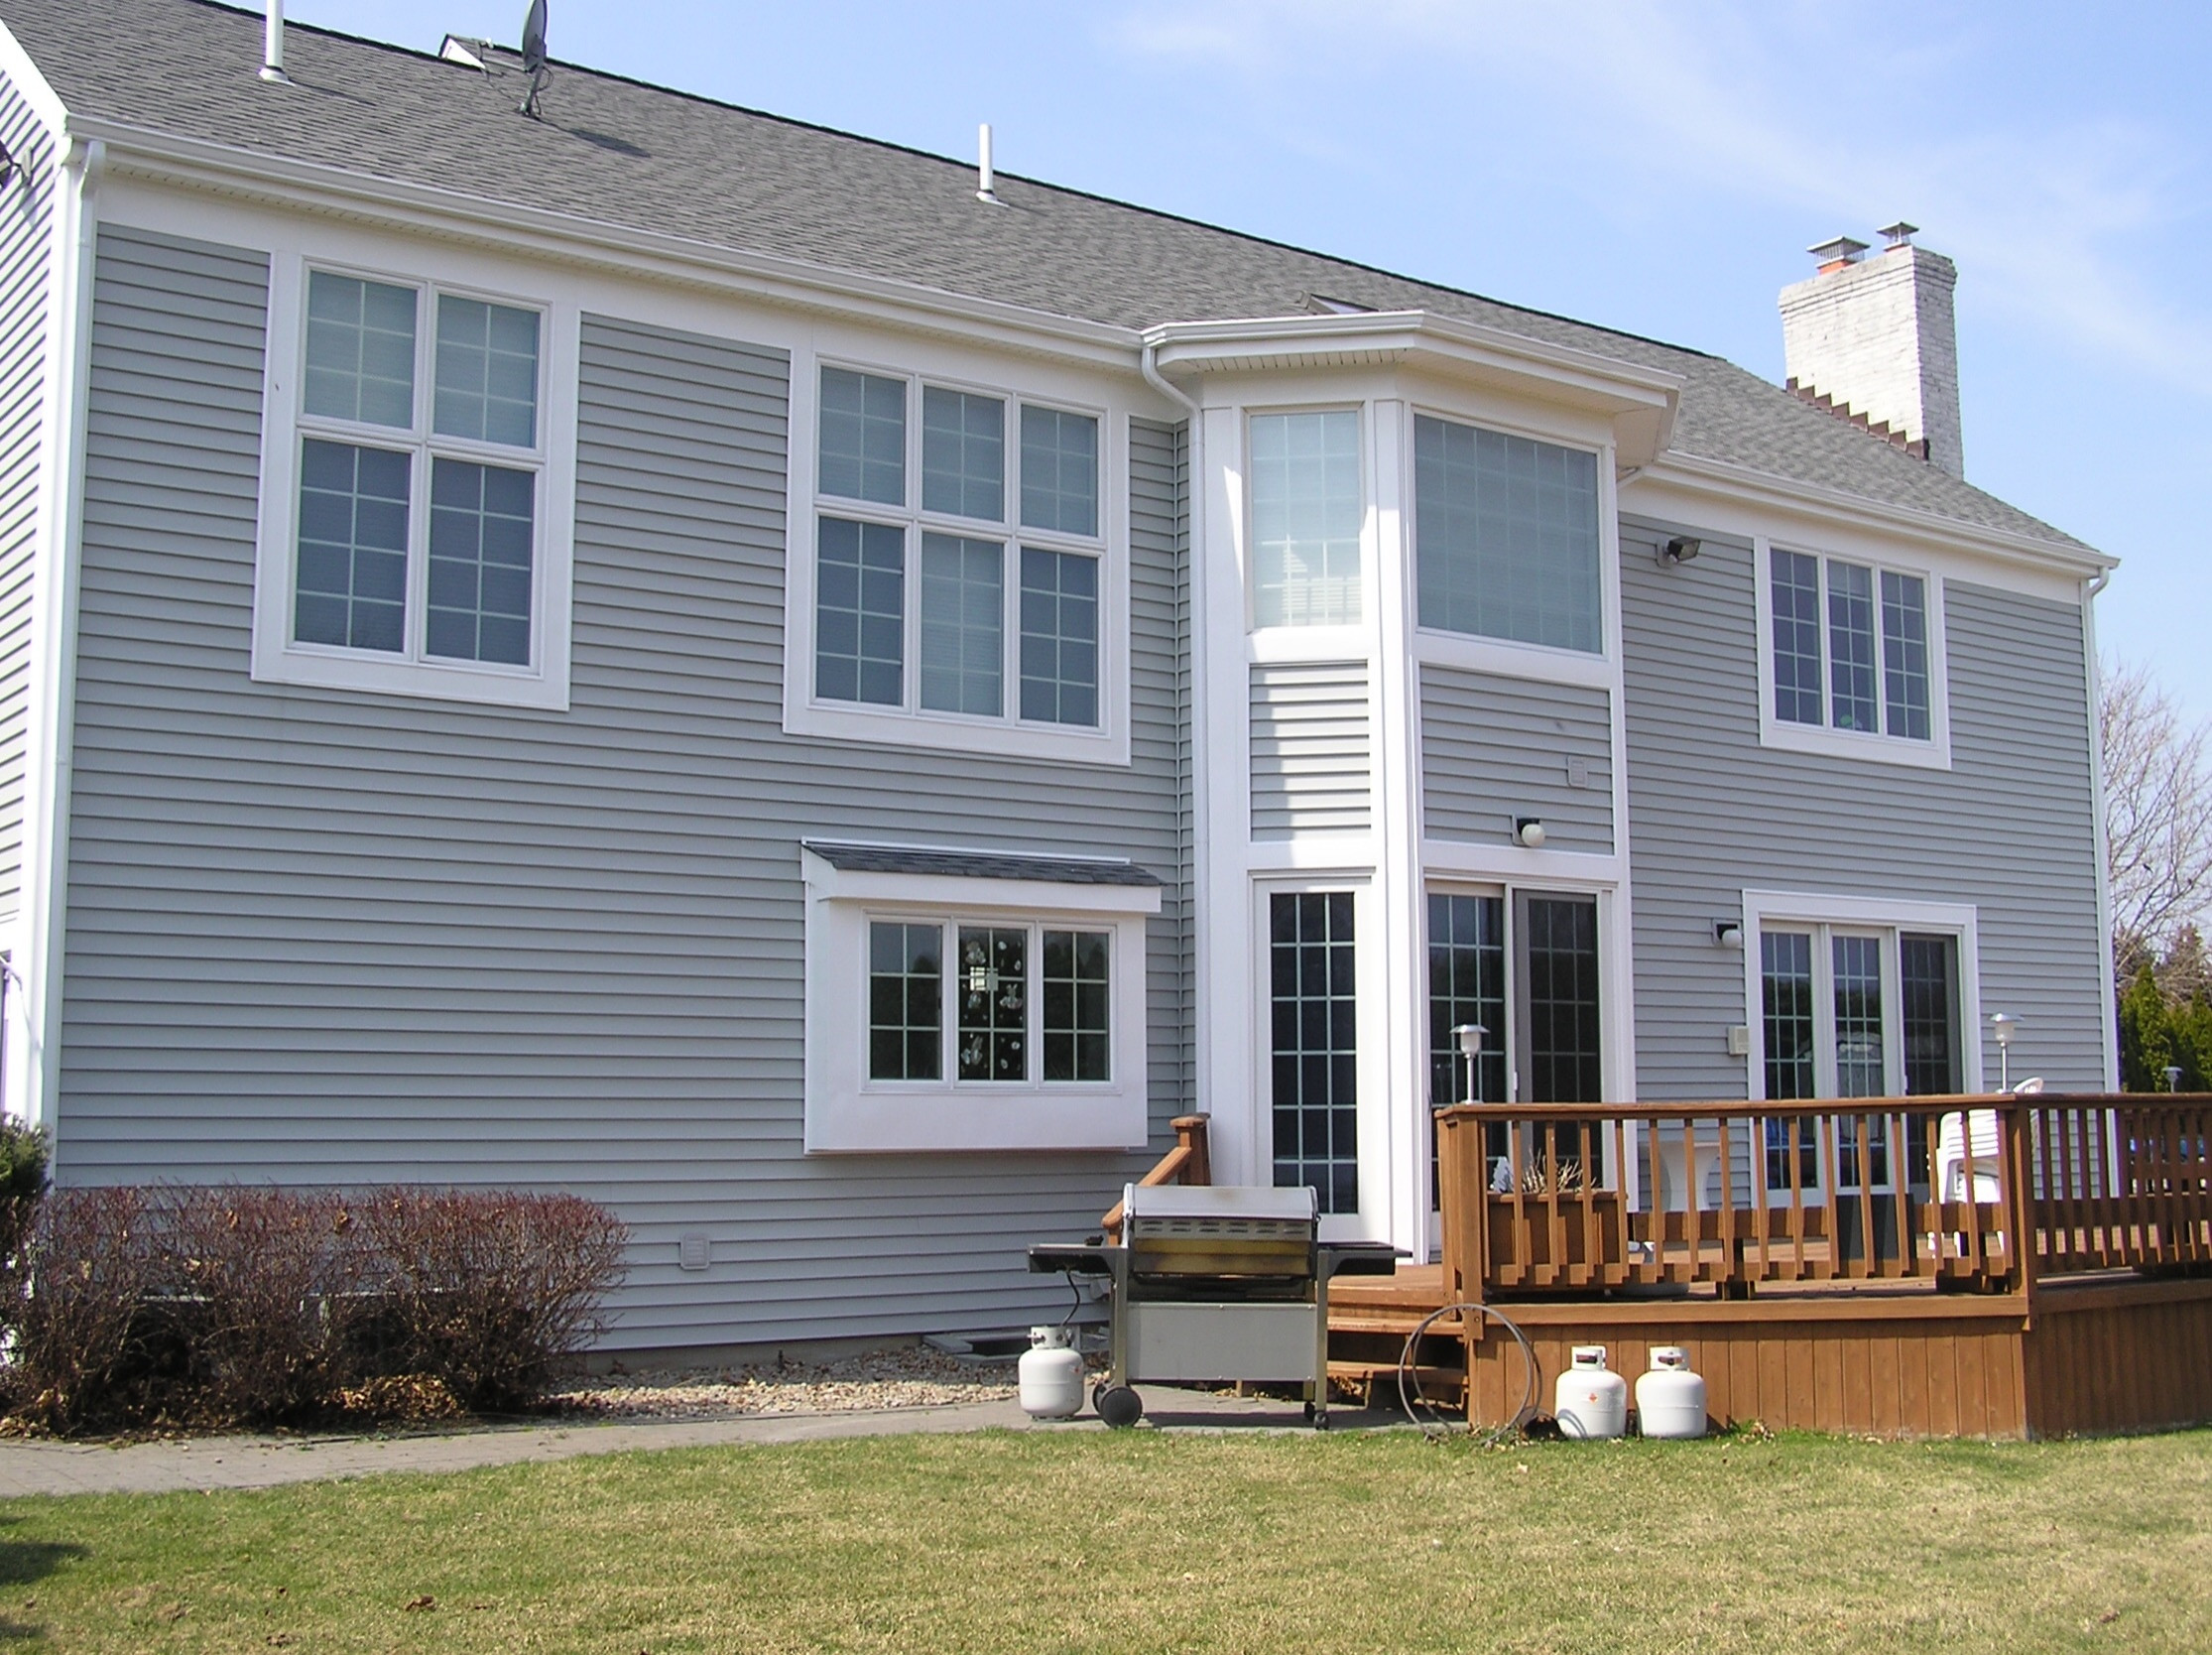 Northport Siding Platinum Gray Clapboard With New Windows And Pewter Gray Roof Traditional Exterior New York By Alpha Windows Siding Houzz